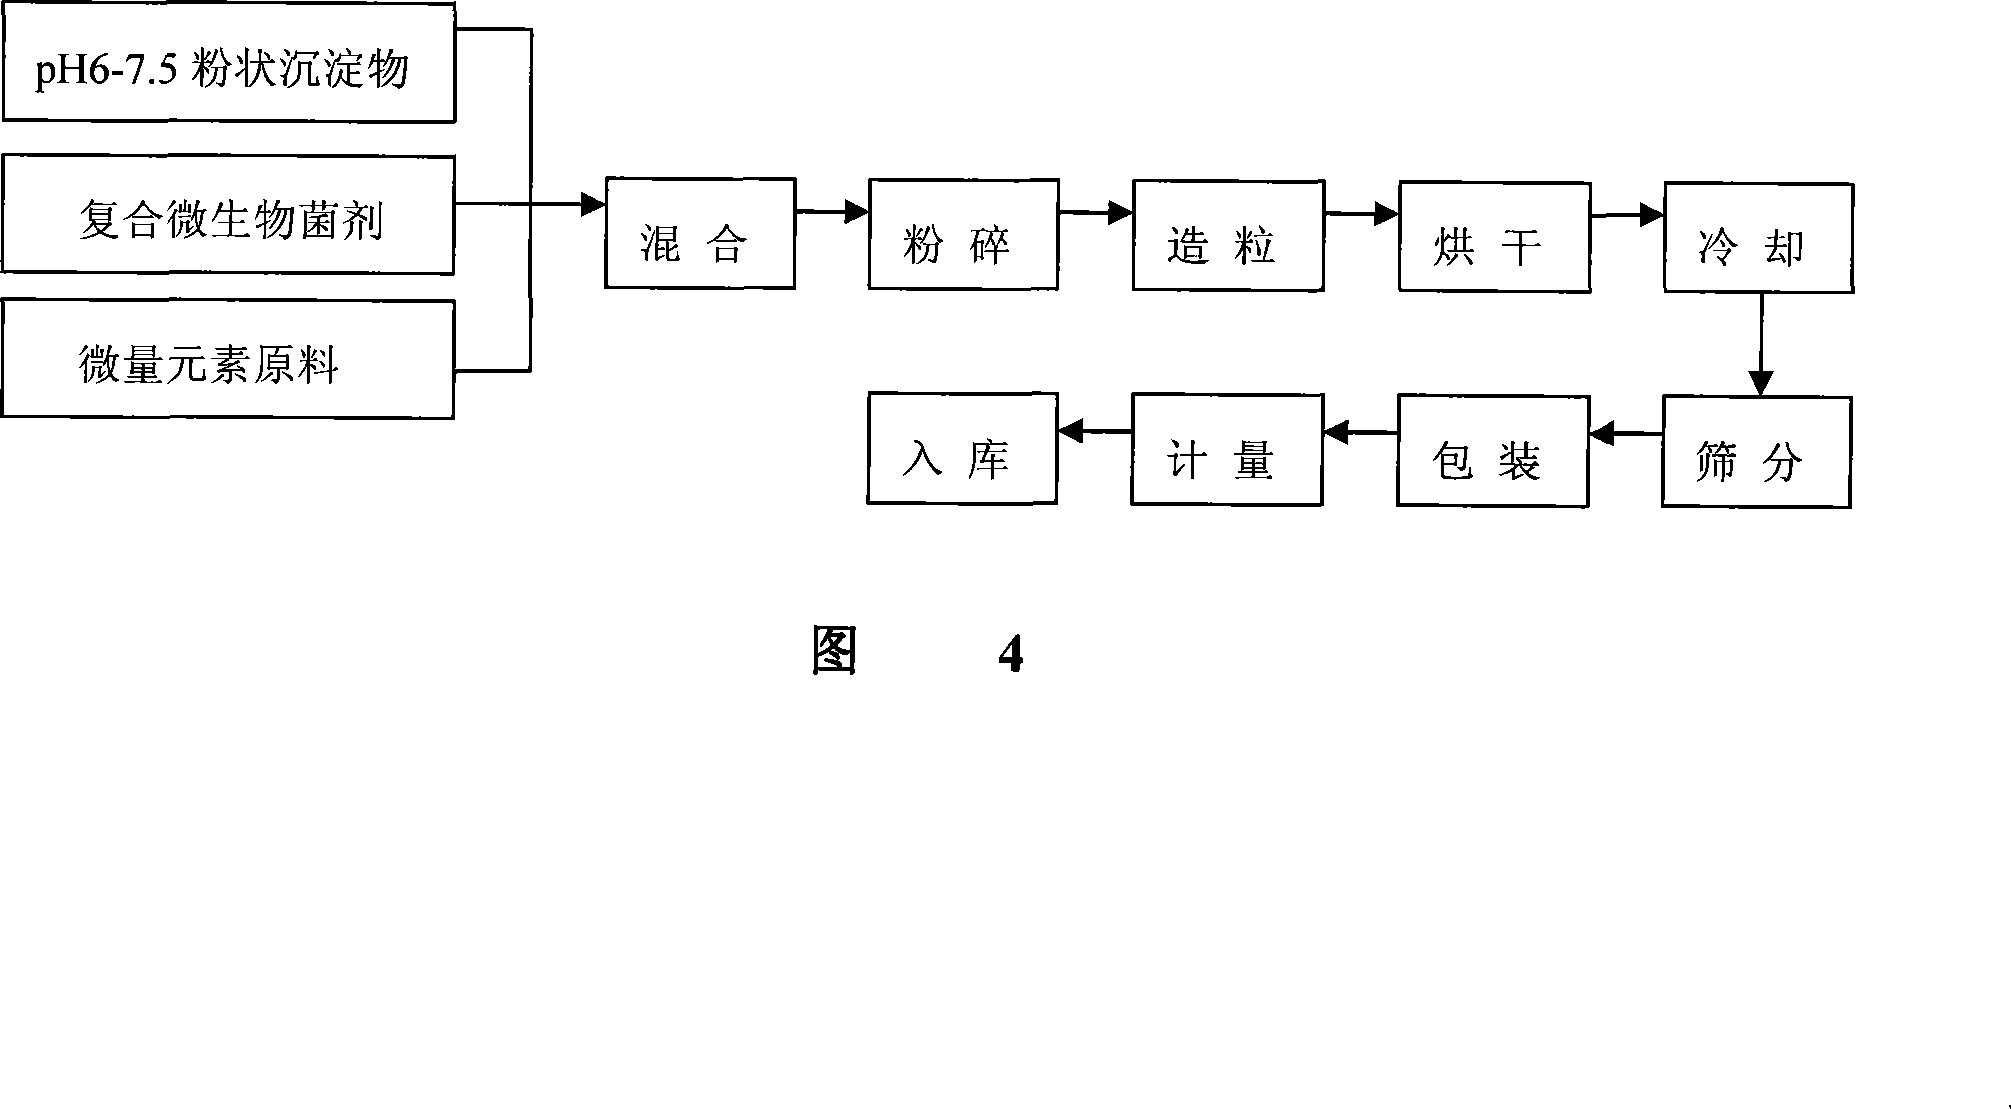 Method for producing soluble composite microorganism fertilizer